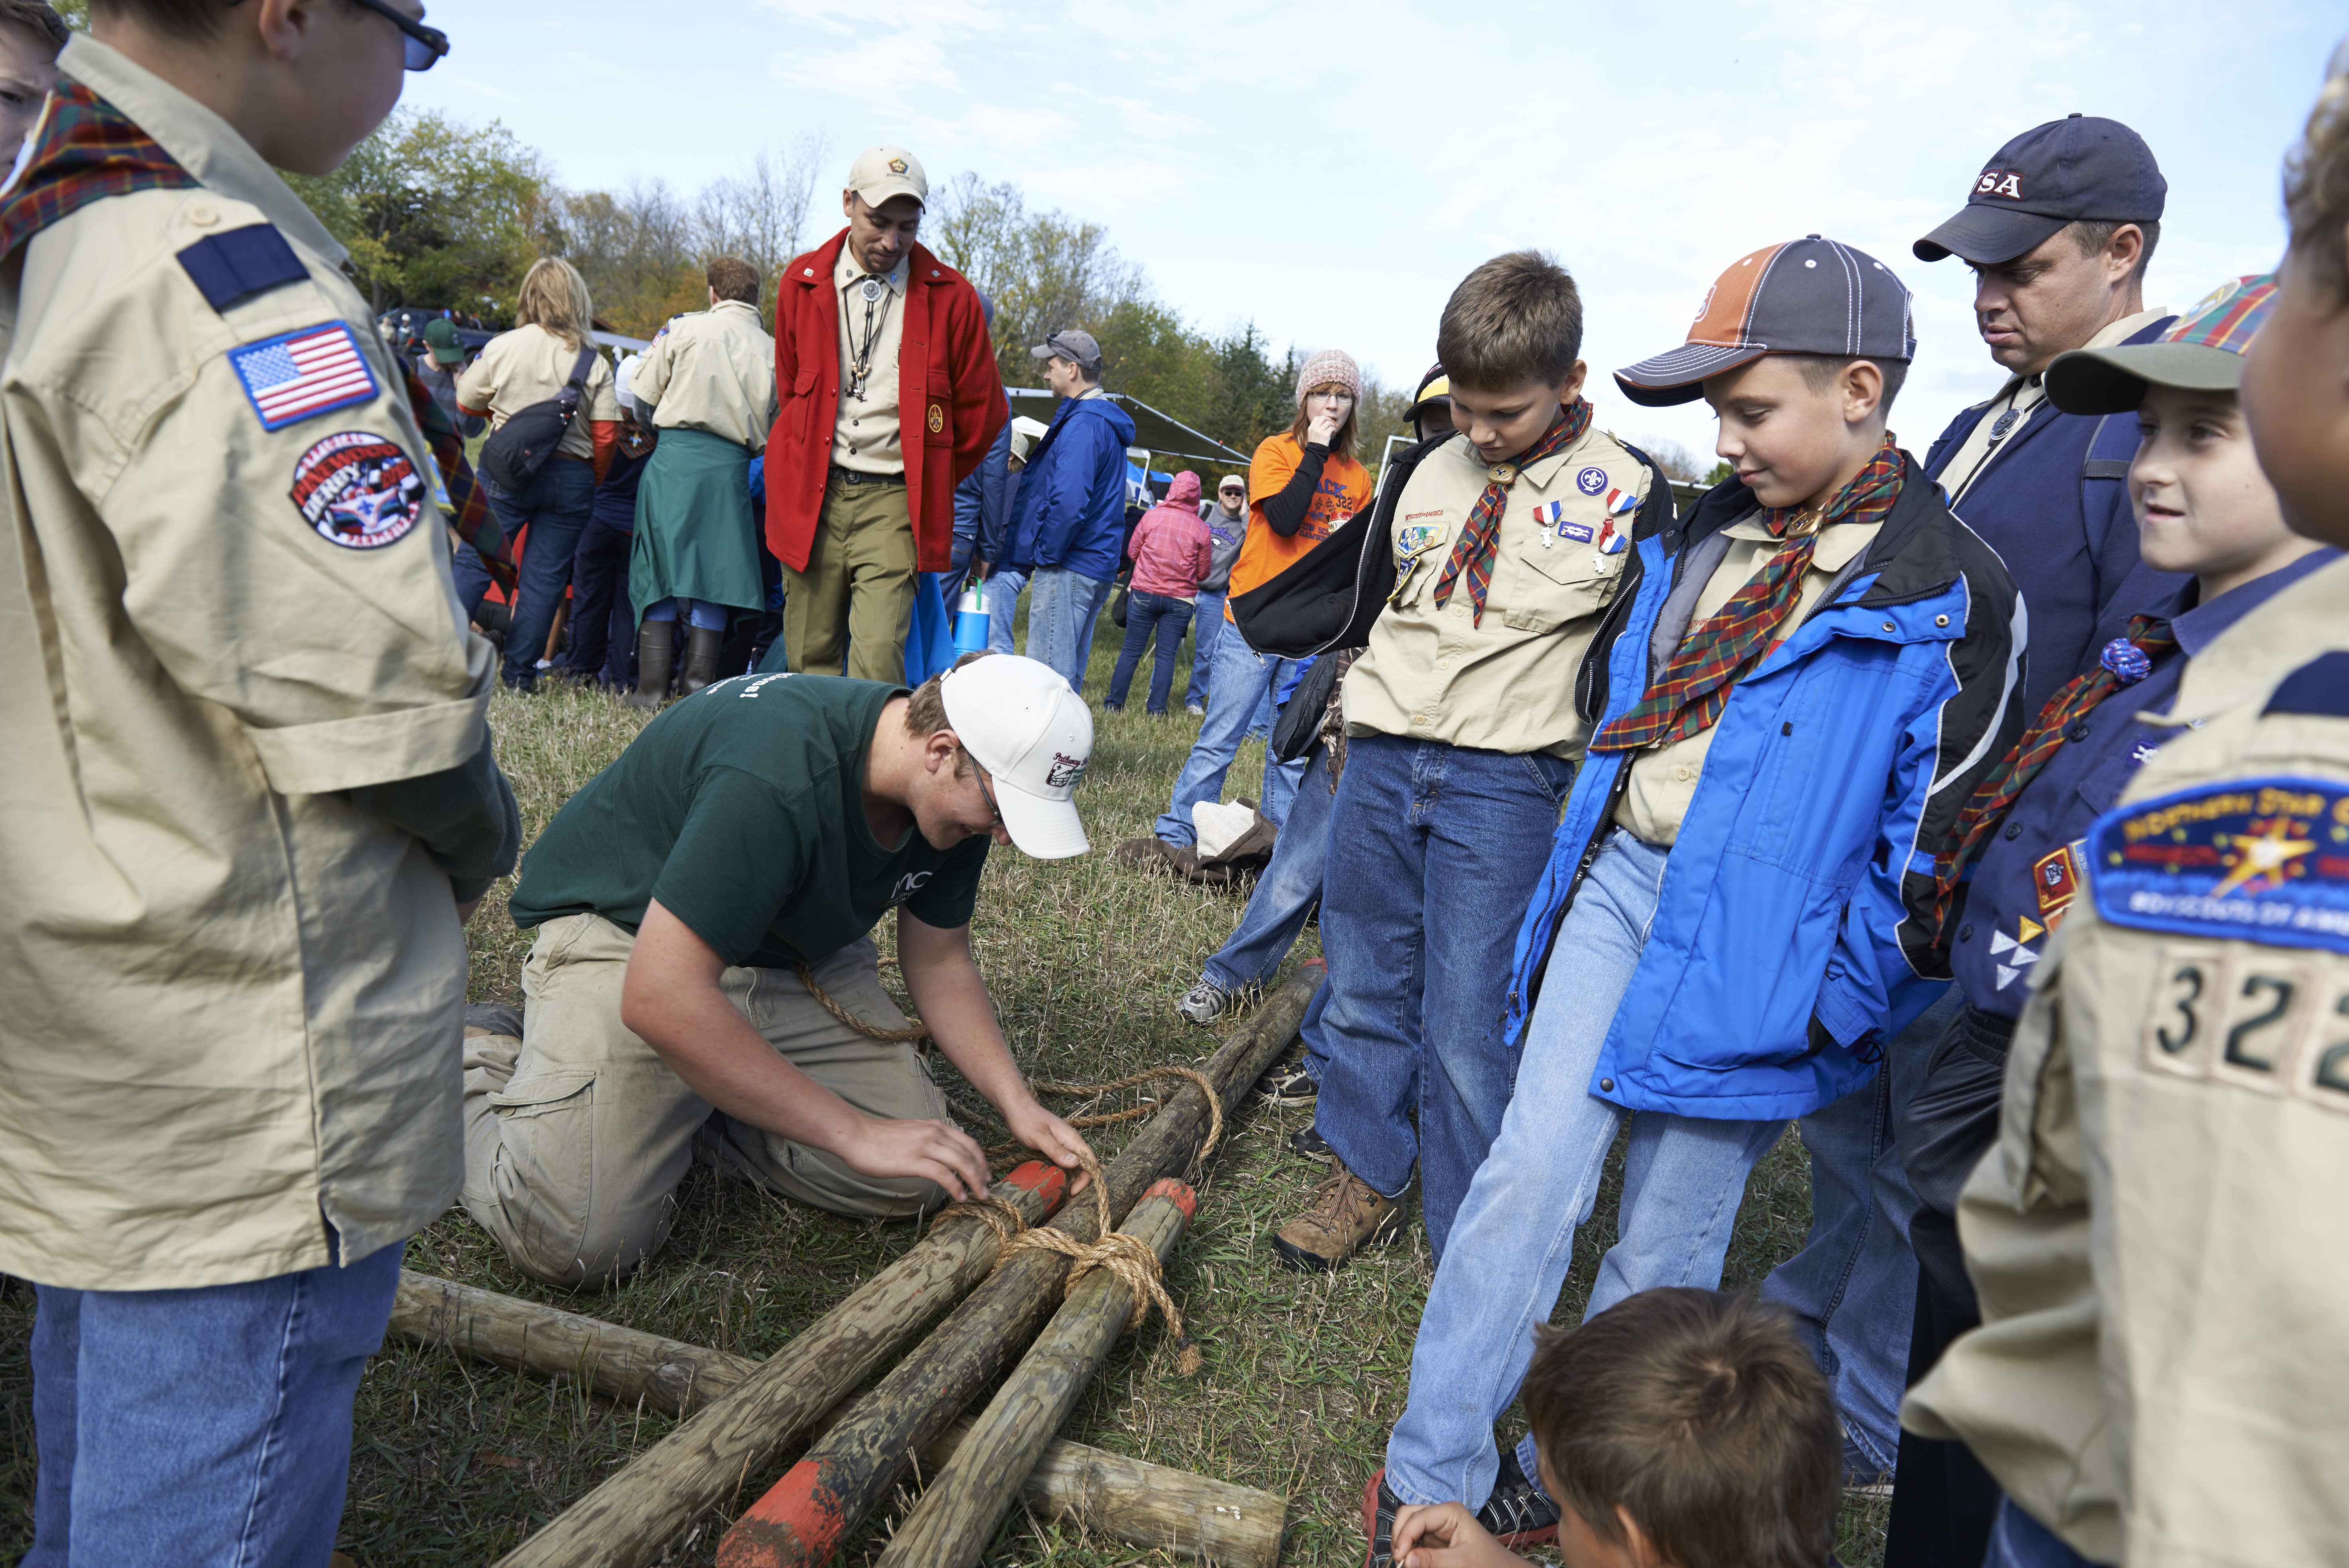 A group of Scouts watching a program counselor tie logs together.